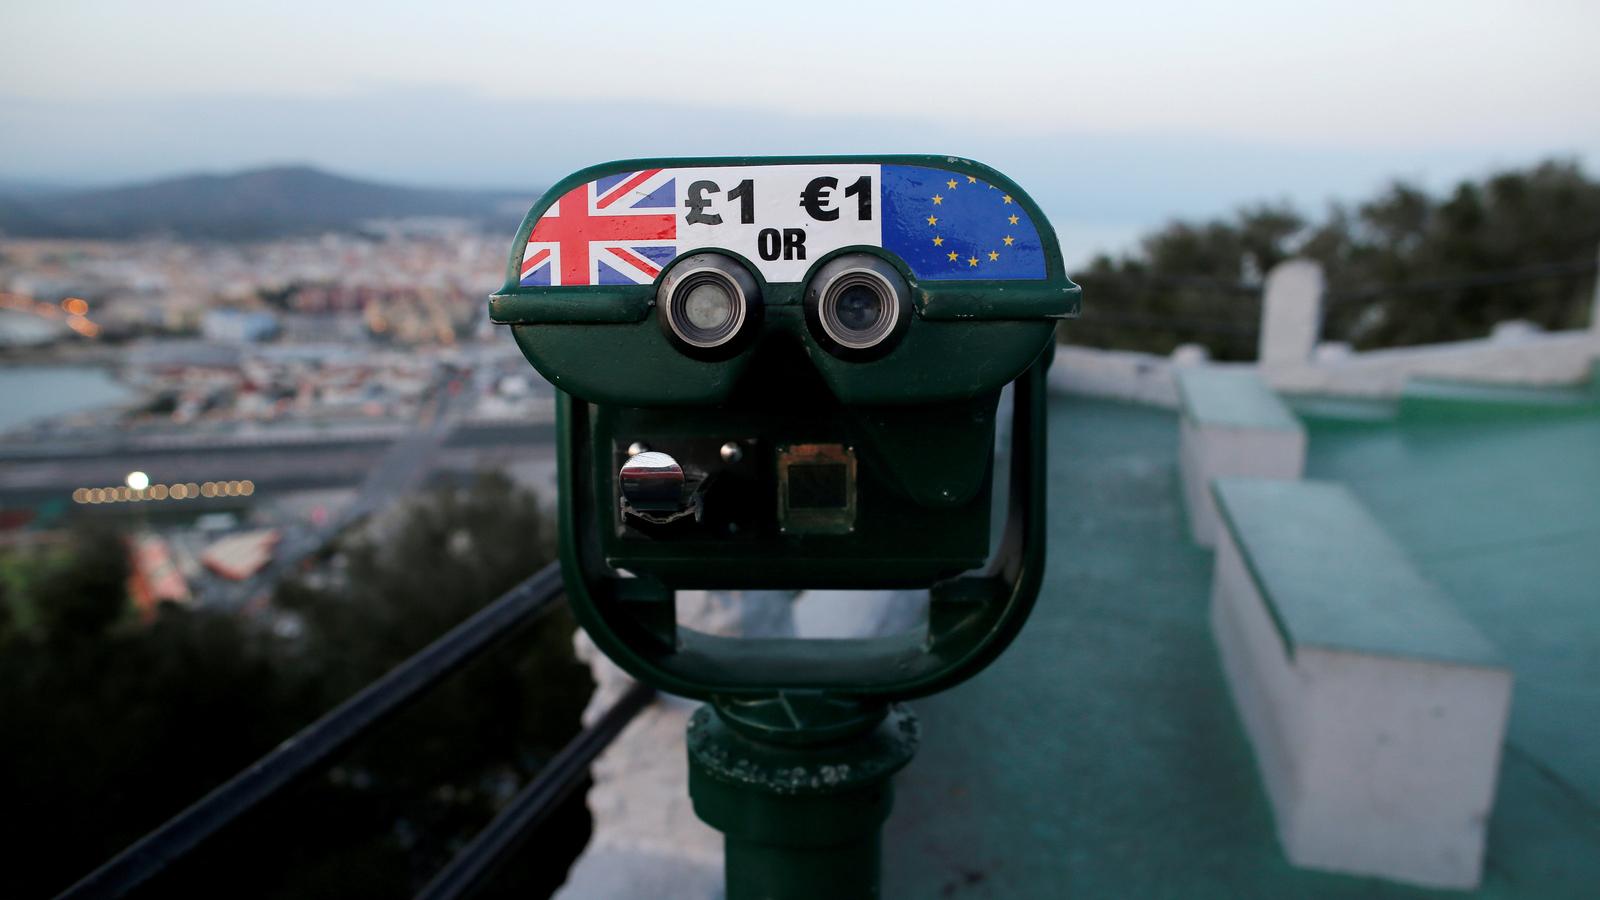 Tourist binoculars with option to pay in pounds or euros.